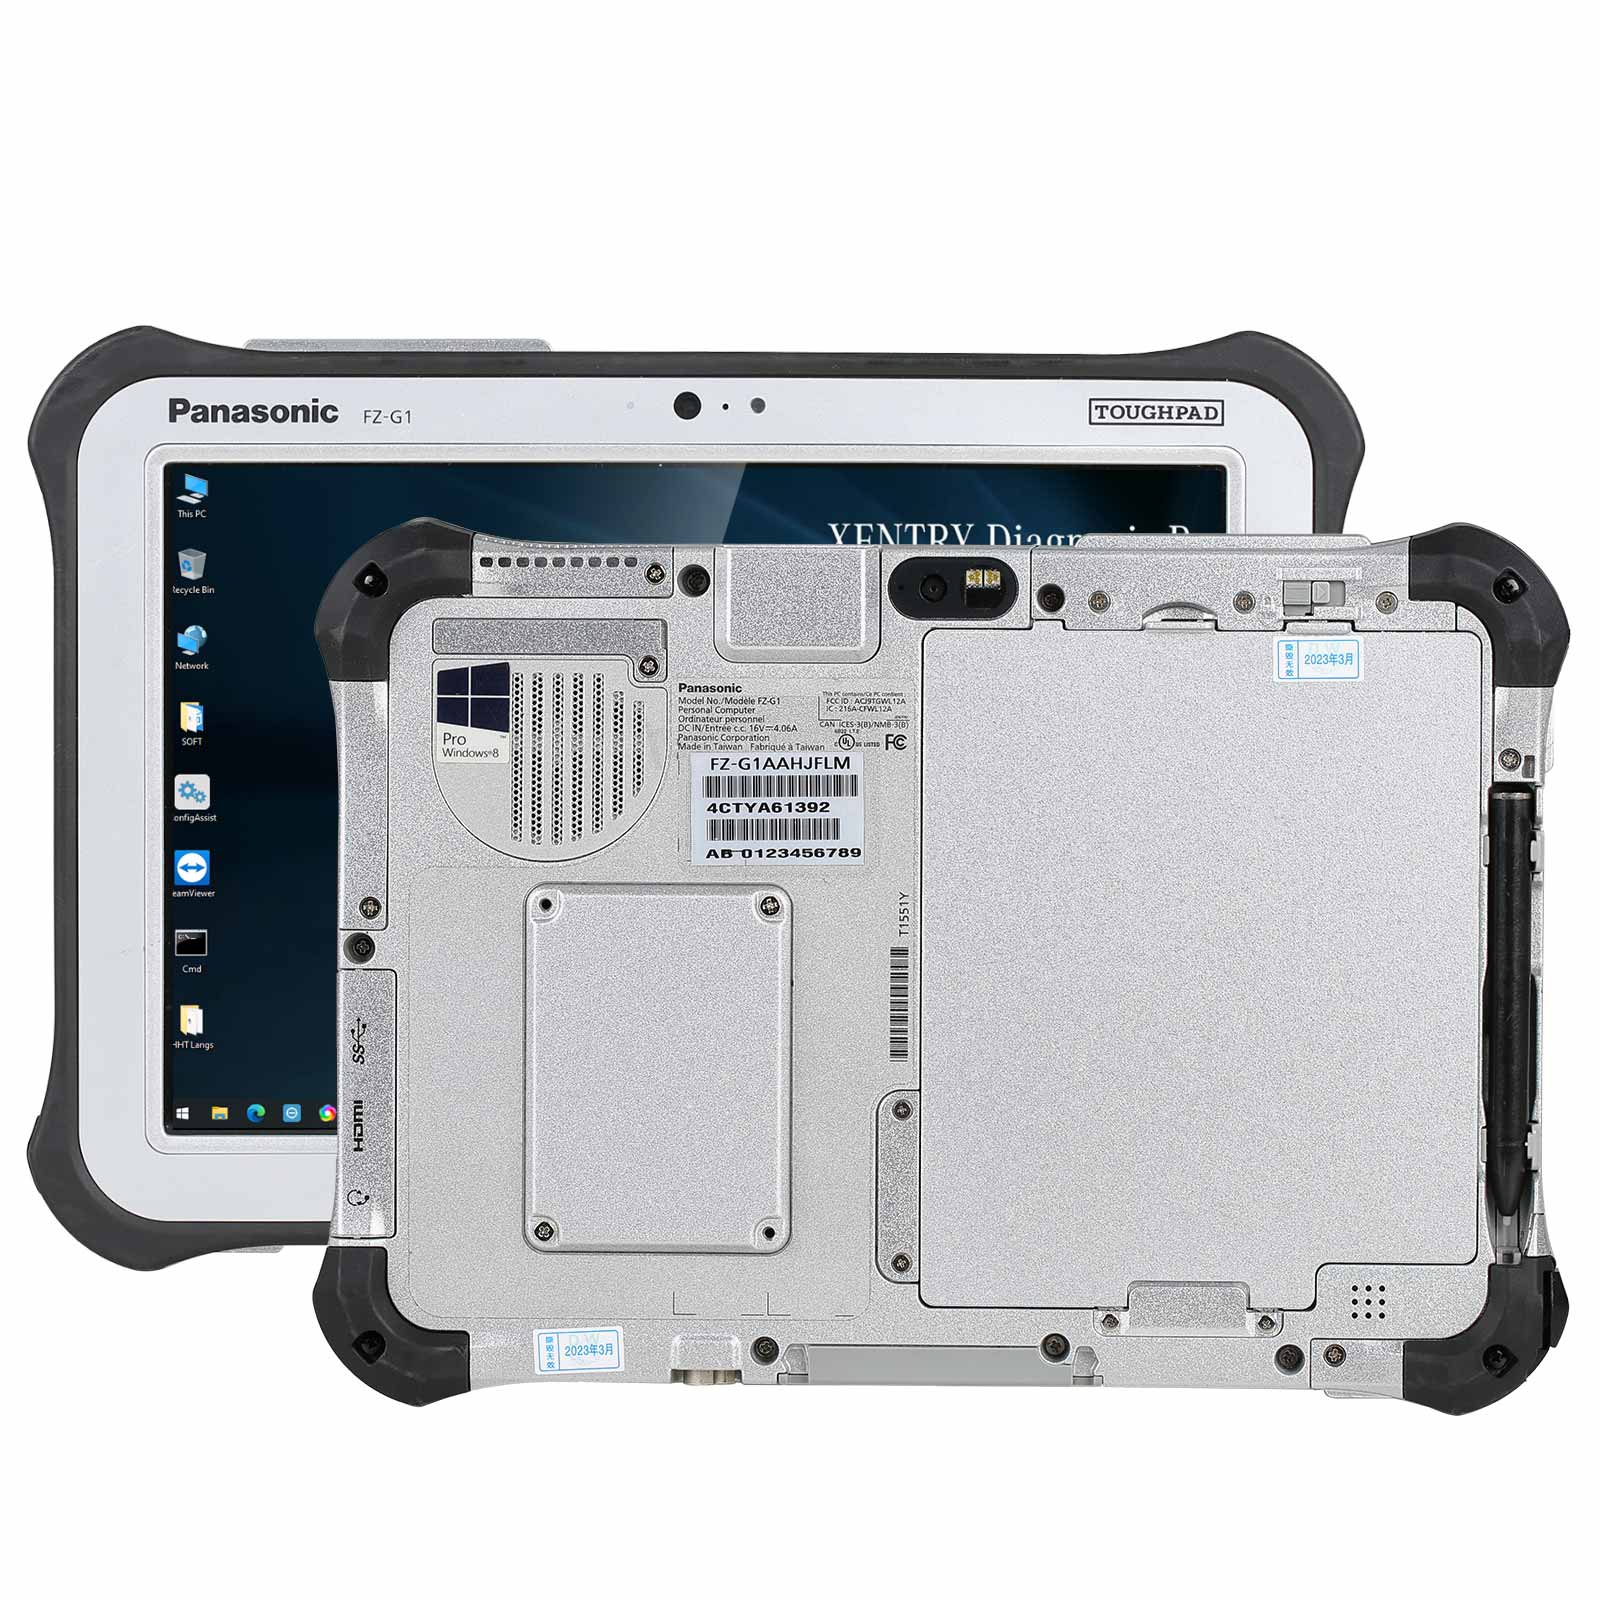 V2023.03 MB SD Connect C4 C5 Doip Star Diagnosis Plus Panasonic FZ-G1 I5 8G Tablet With Engineering Software